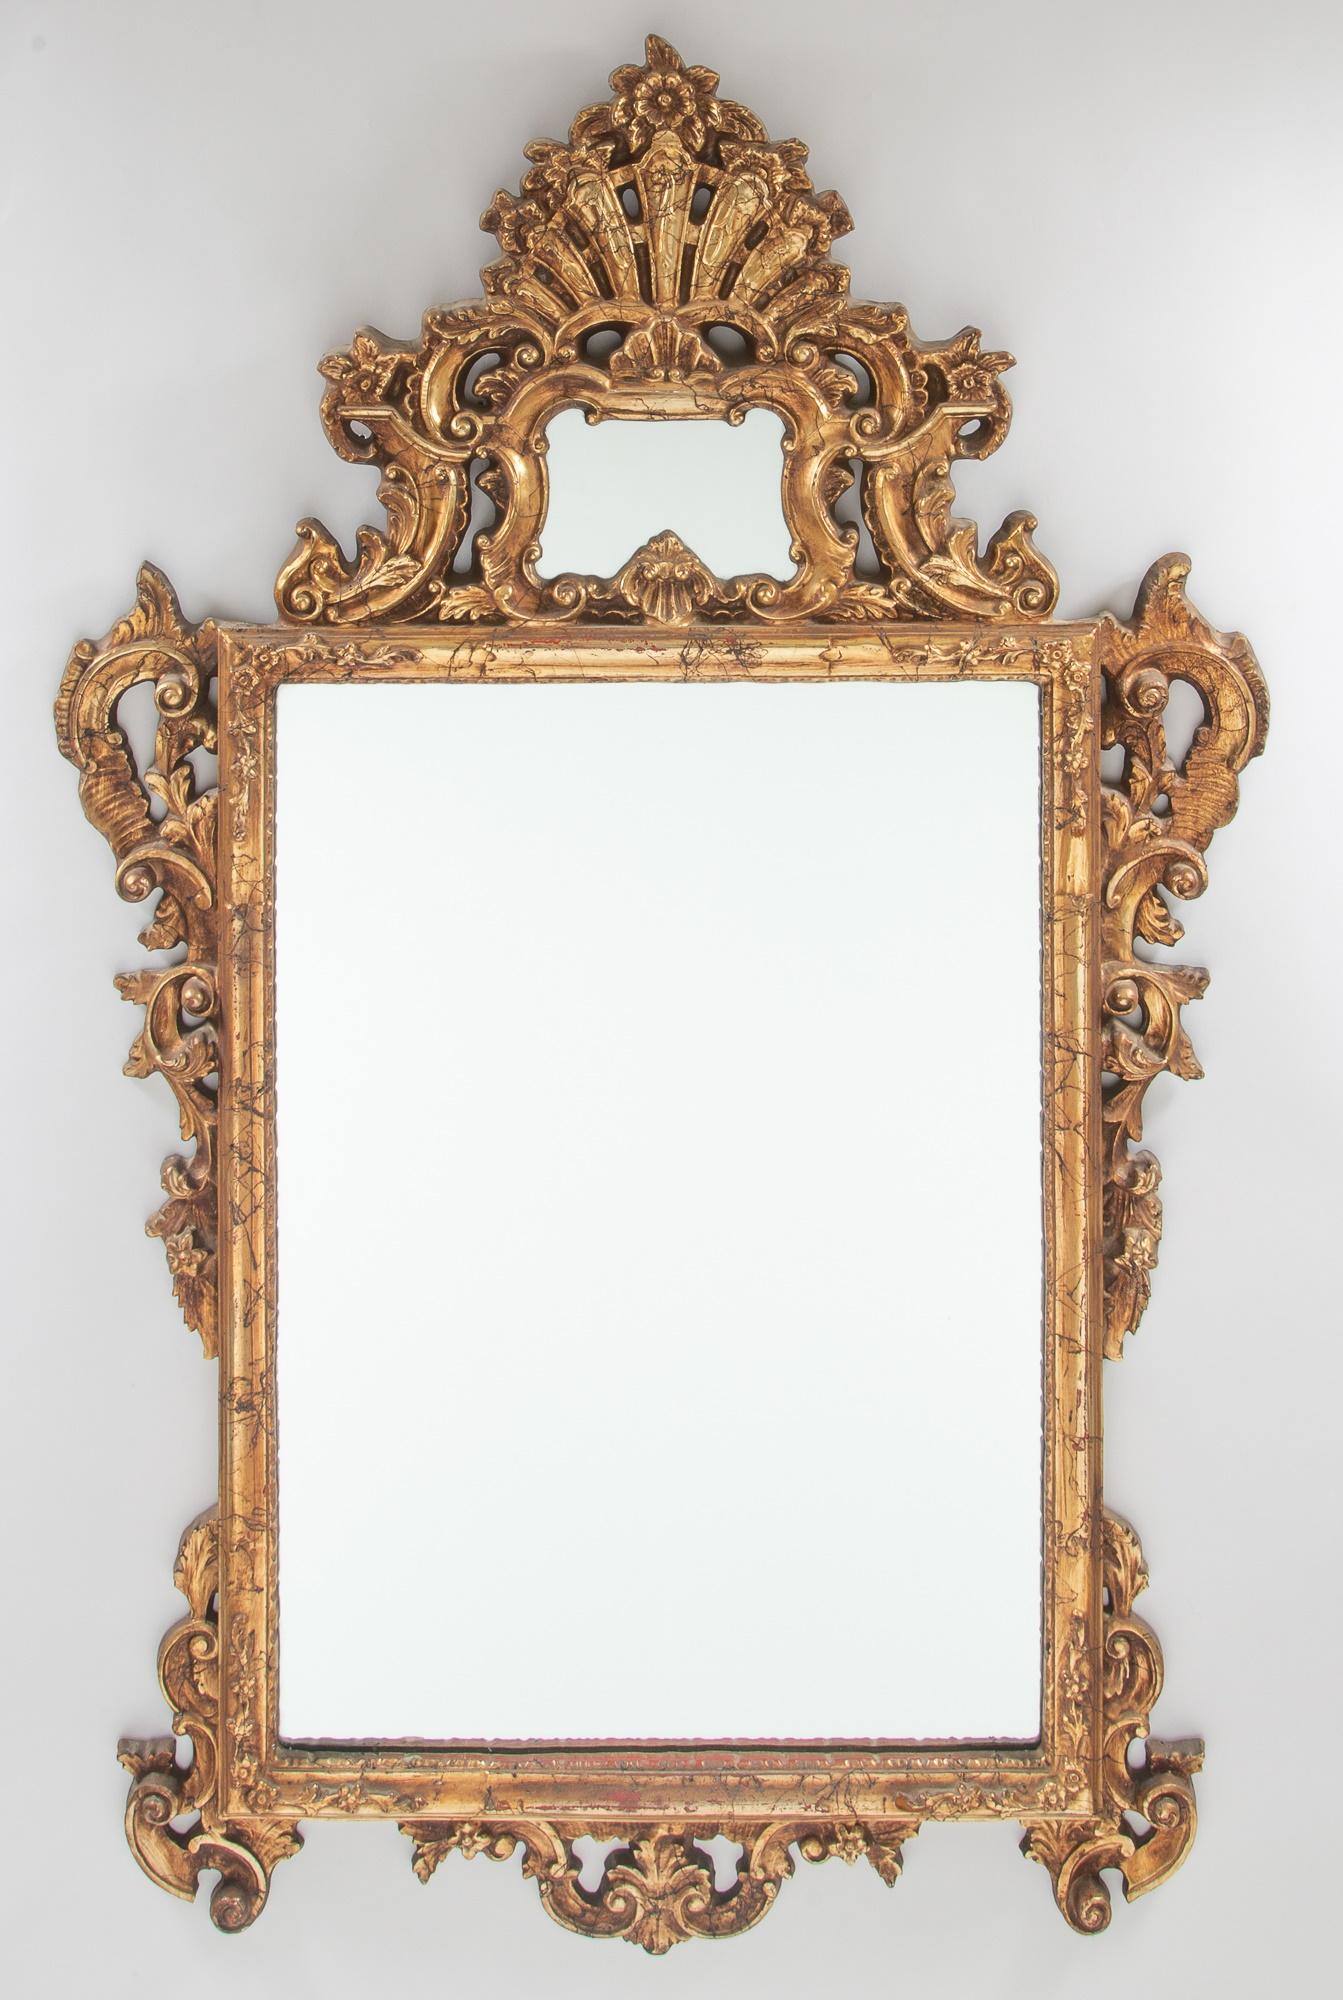 Add a touch of elegance and opulence to your home with this stunning mid-20th century Italian hand-carved and giltwood Rococo-style mantel/fireplace mirror. The mirror is encased in an exquisitely ornate giltwood frame, featuring intricate design